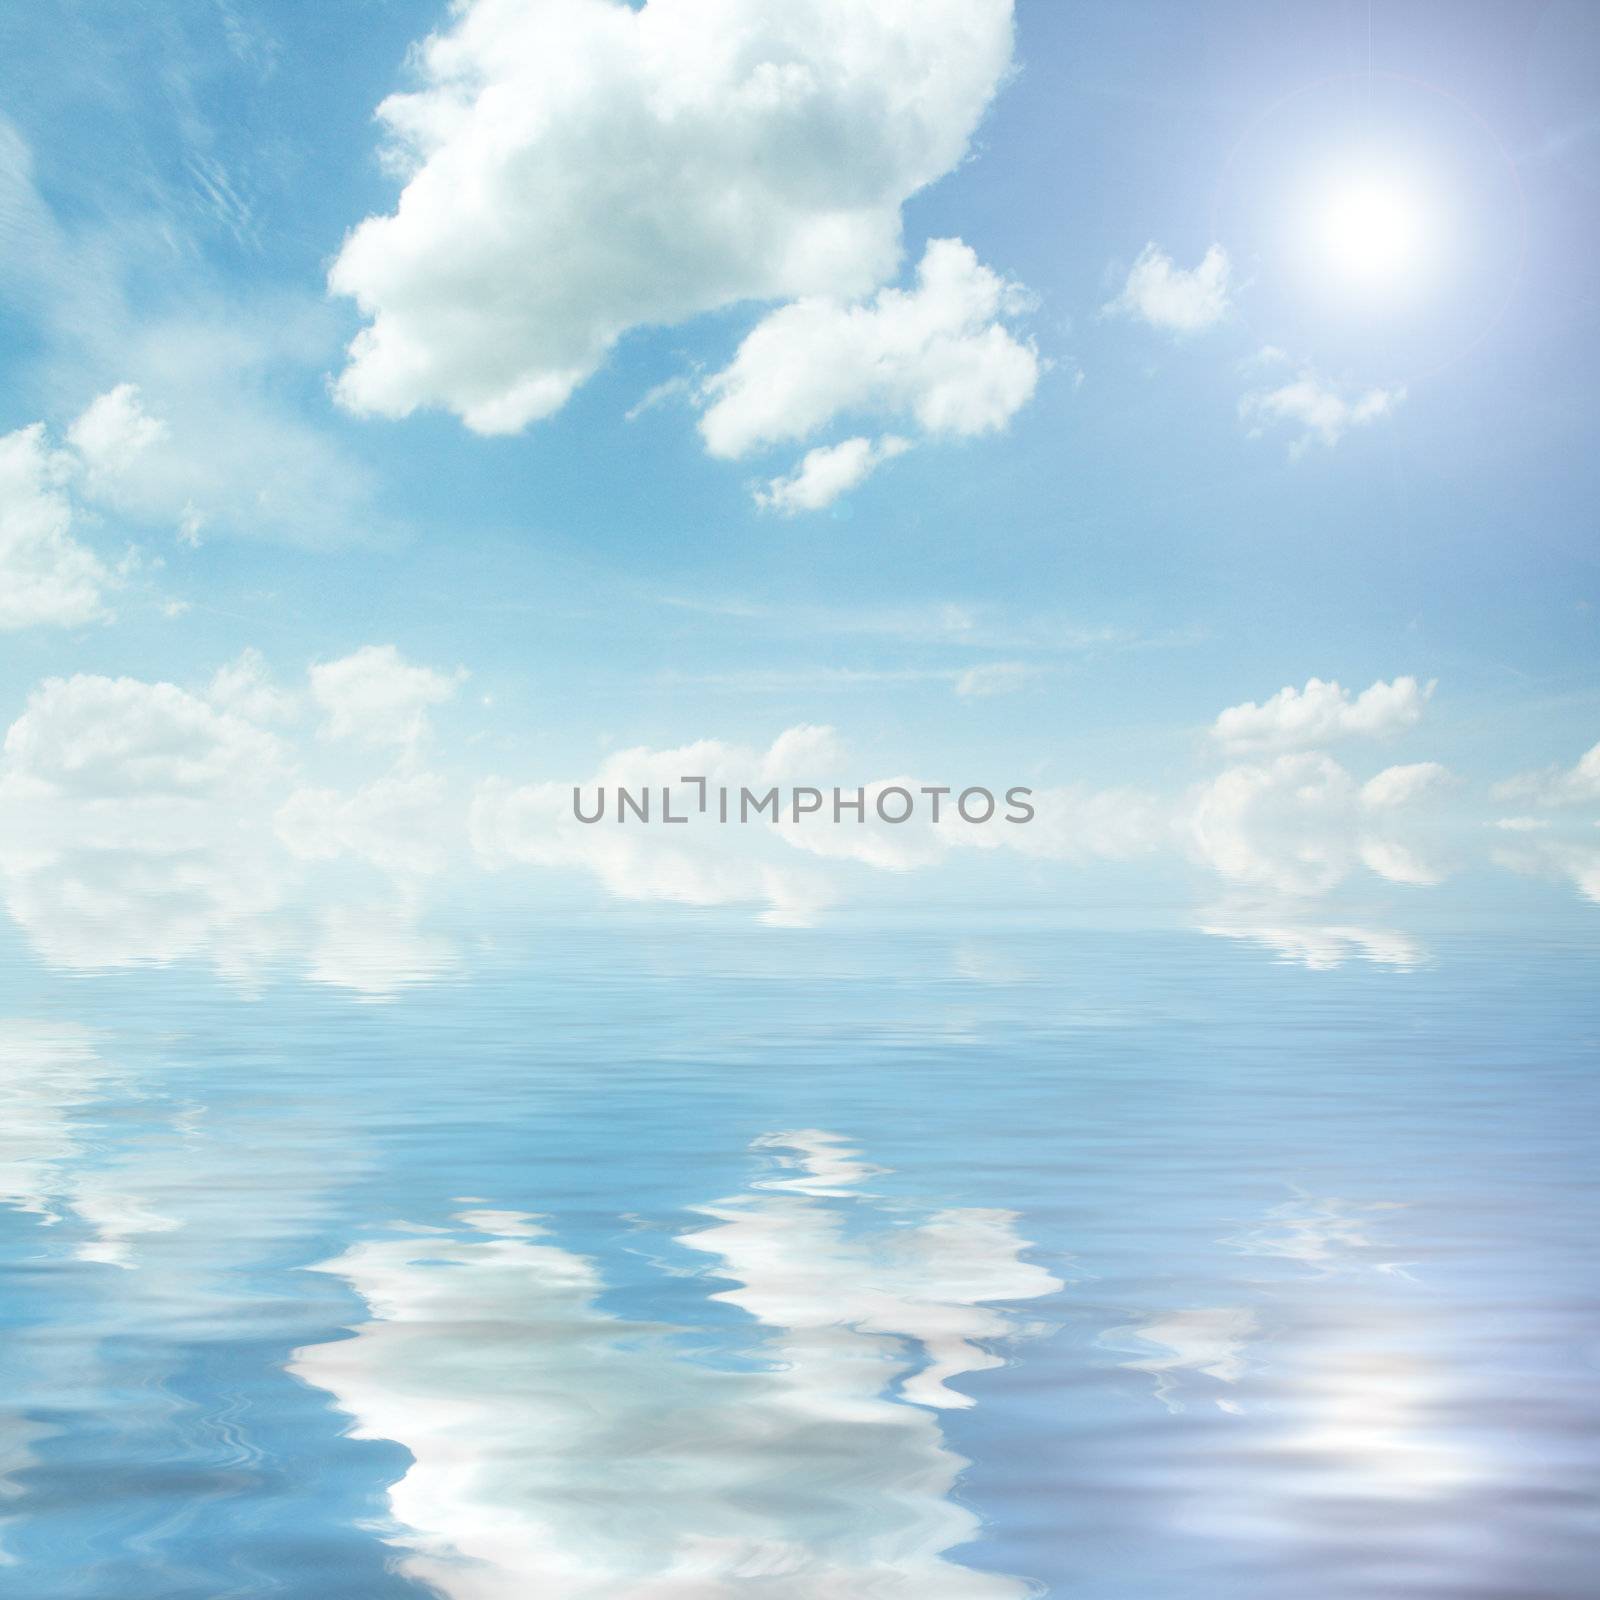 sun, blue sky, and ocean of clouds   by photochecker